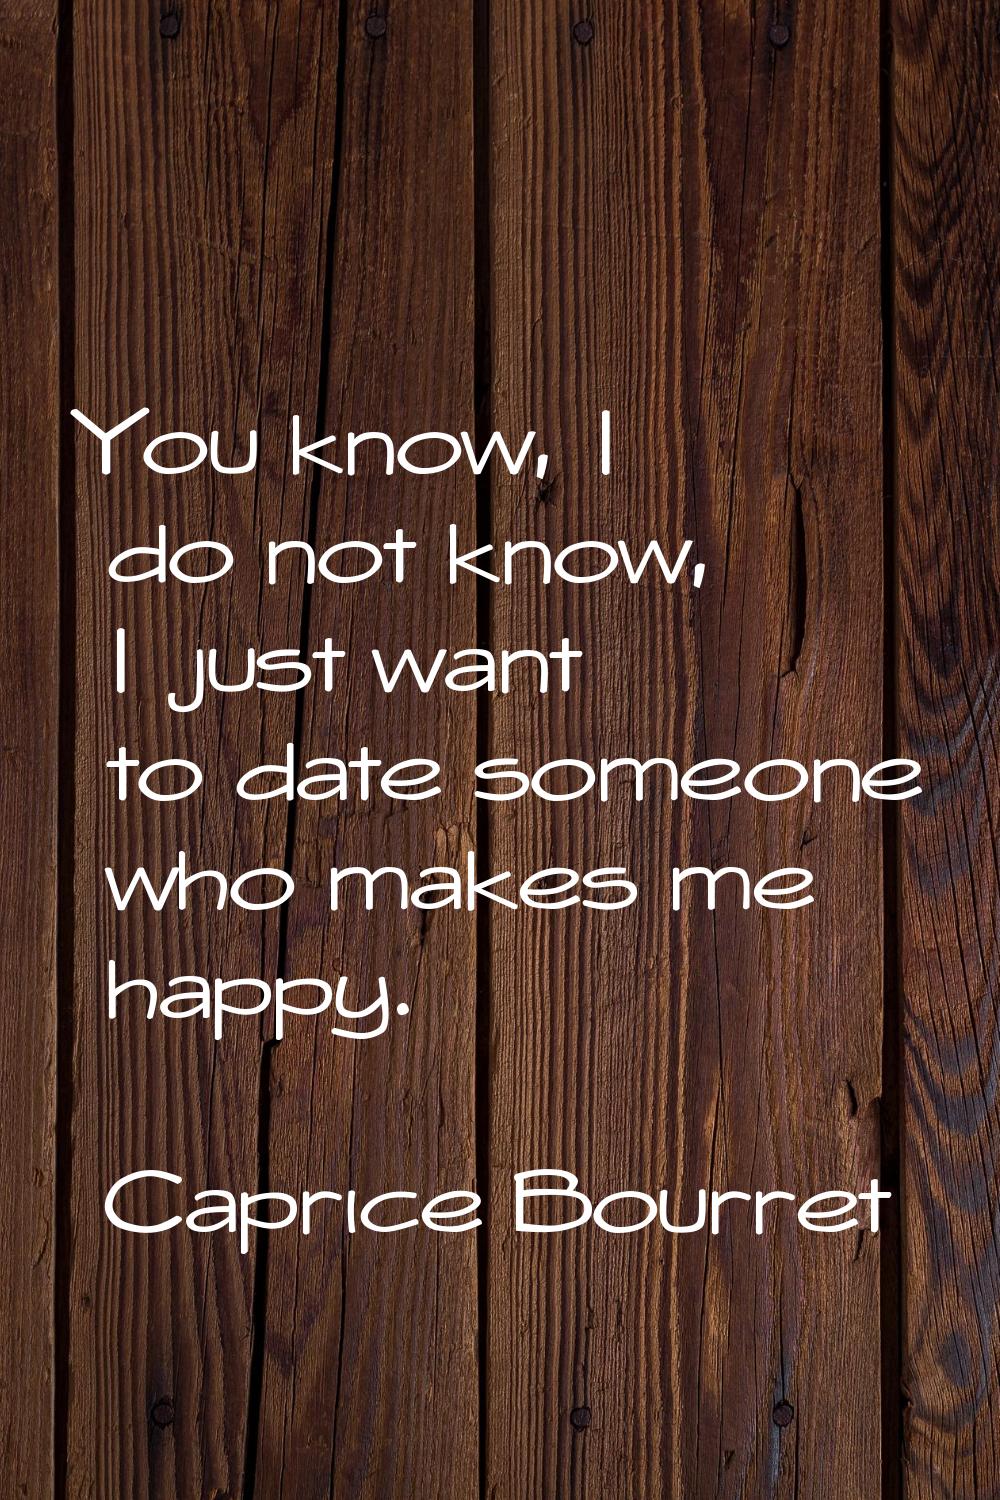 You know, I do not know, I just want to date someone who makes me happy.